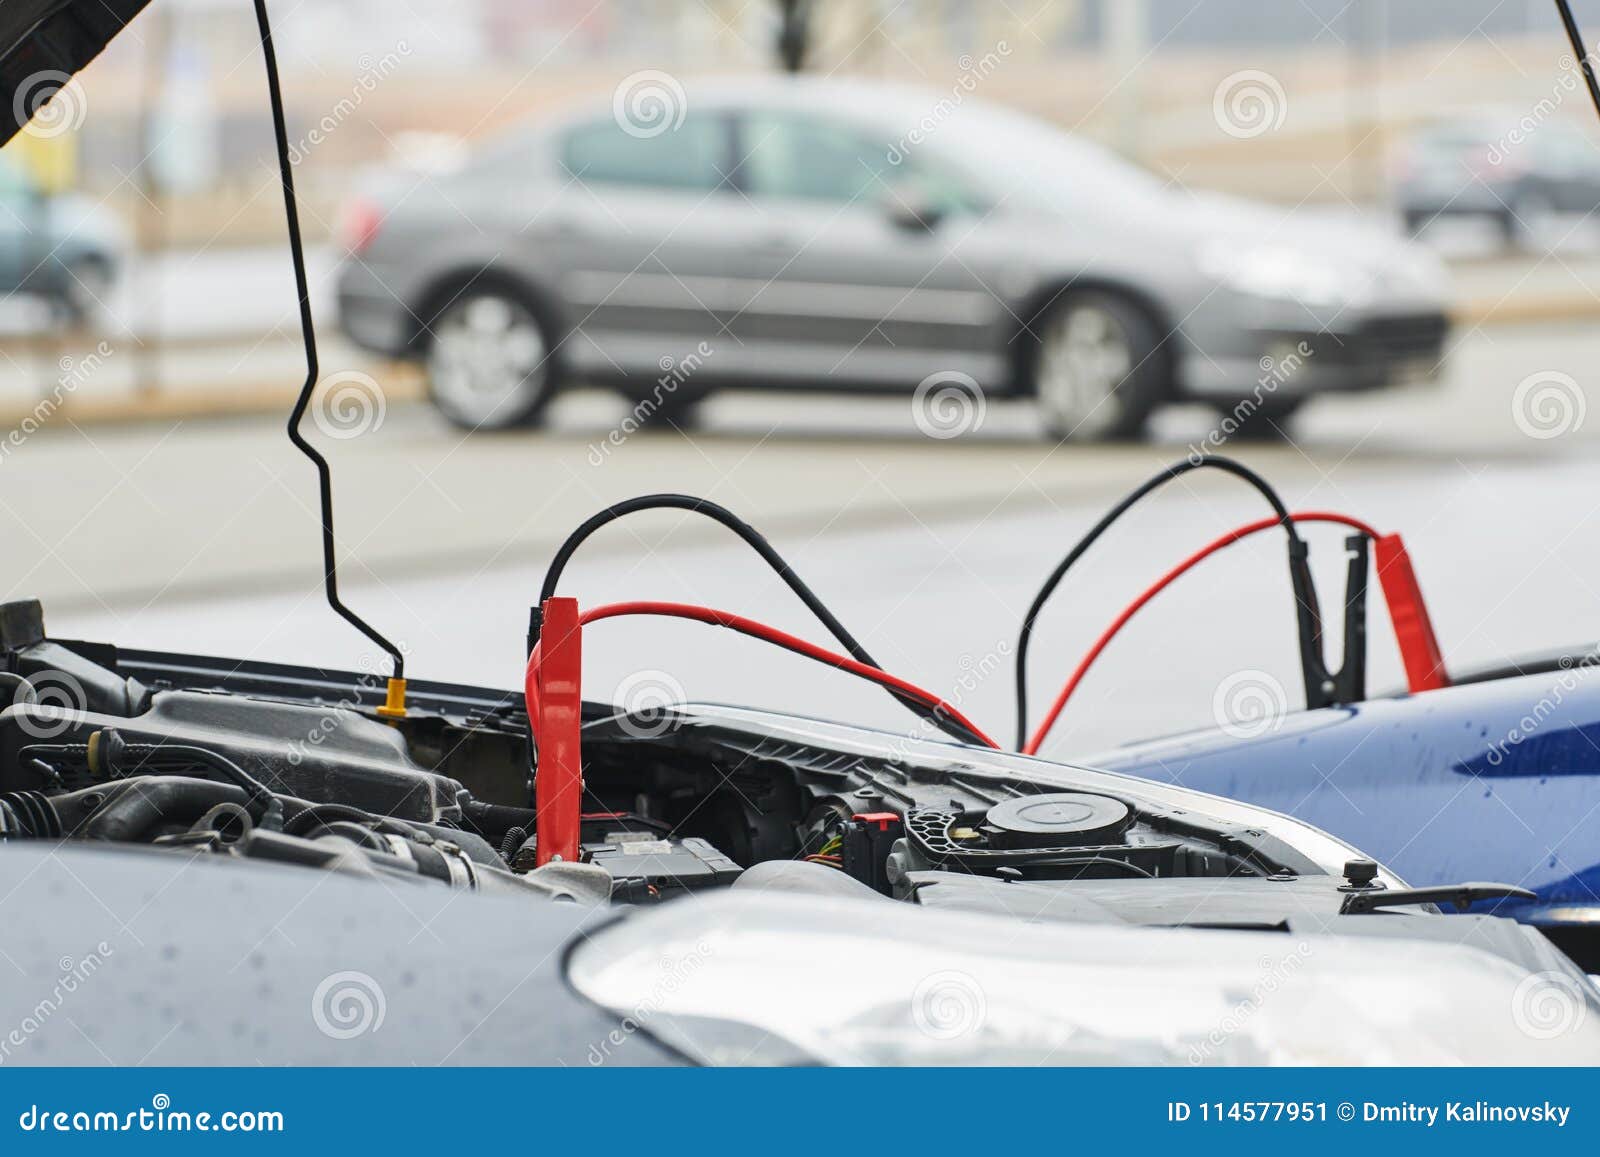 automobile help. booster jumper cables charging automobile discharged battery